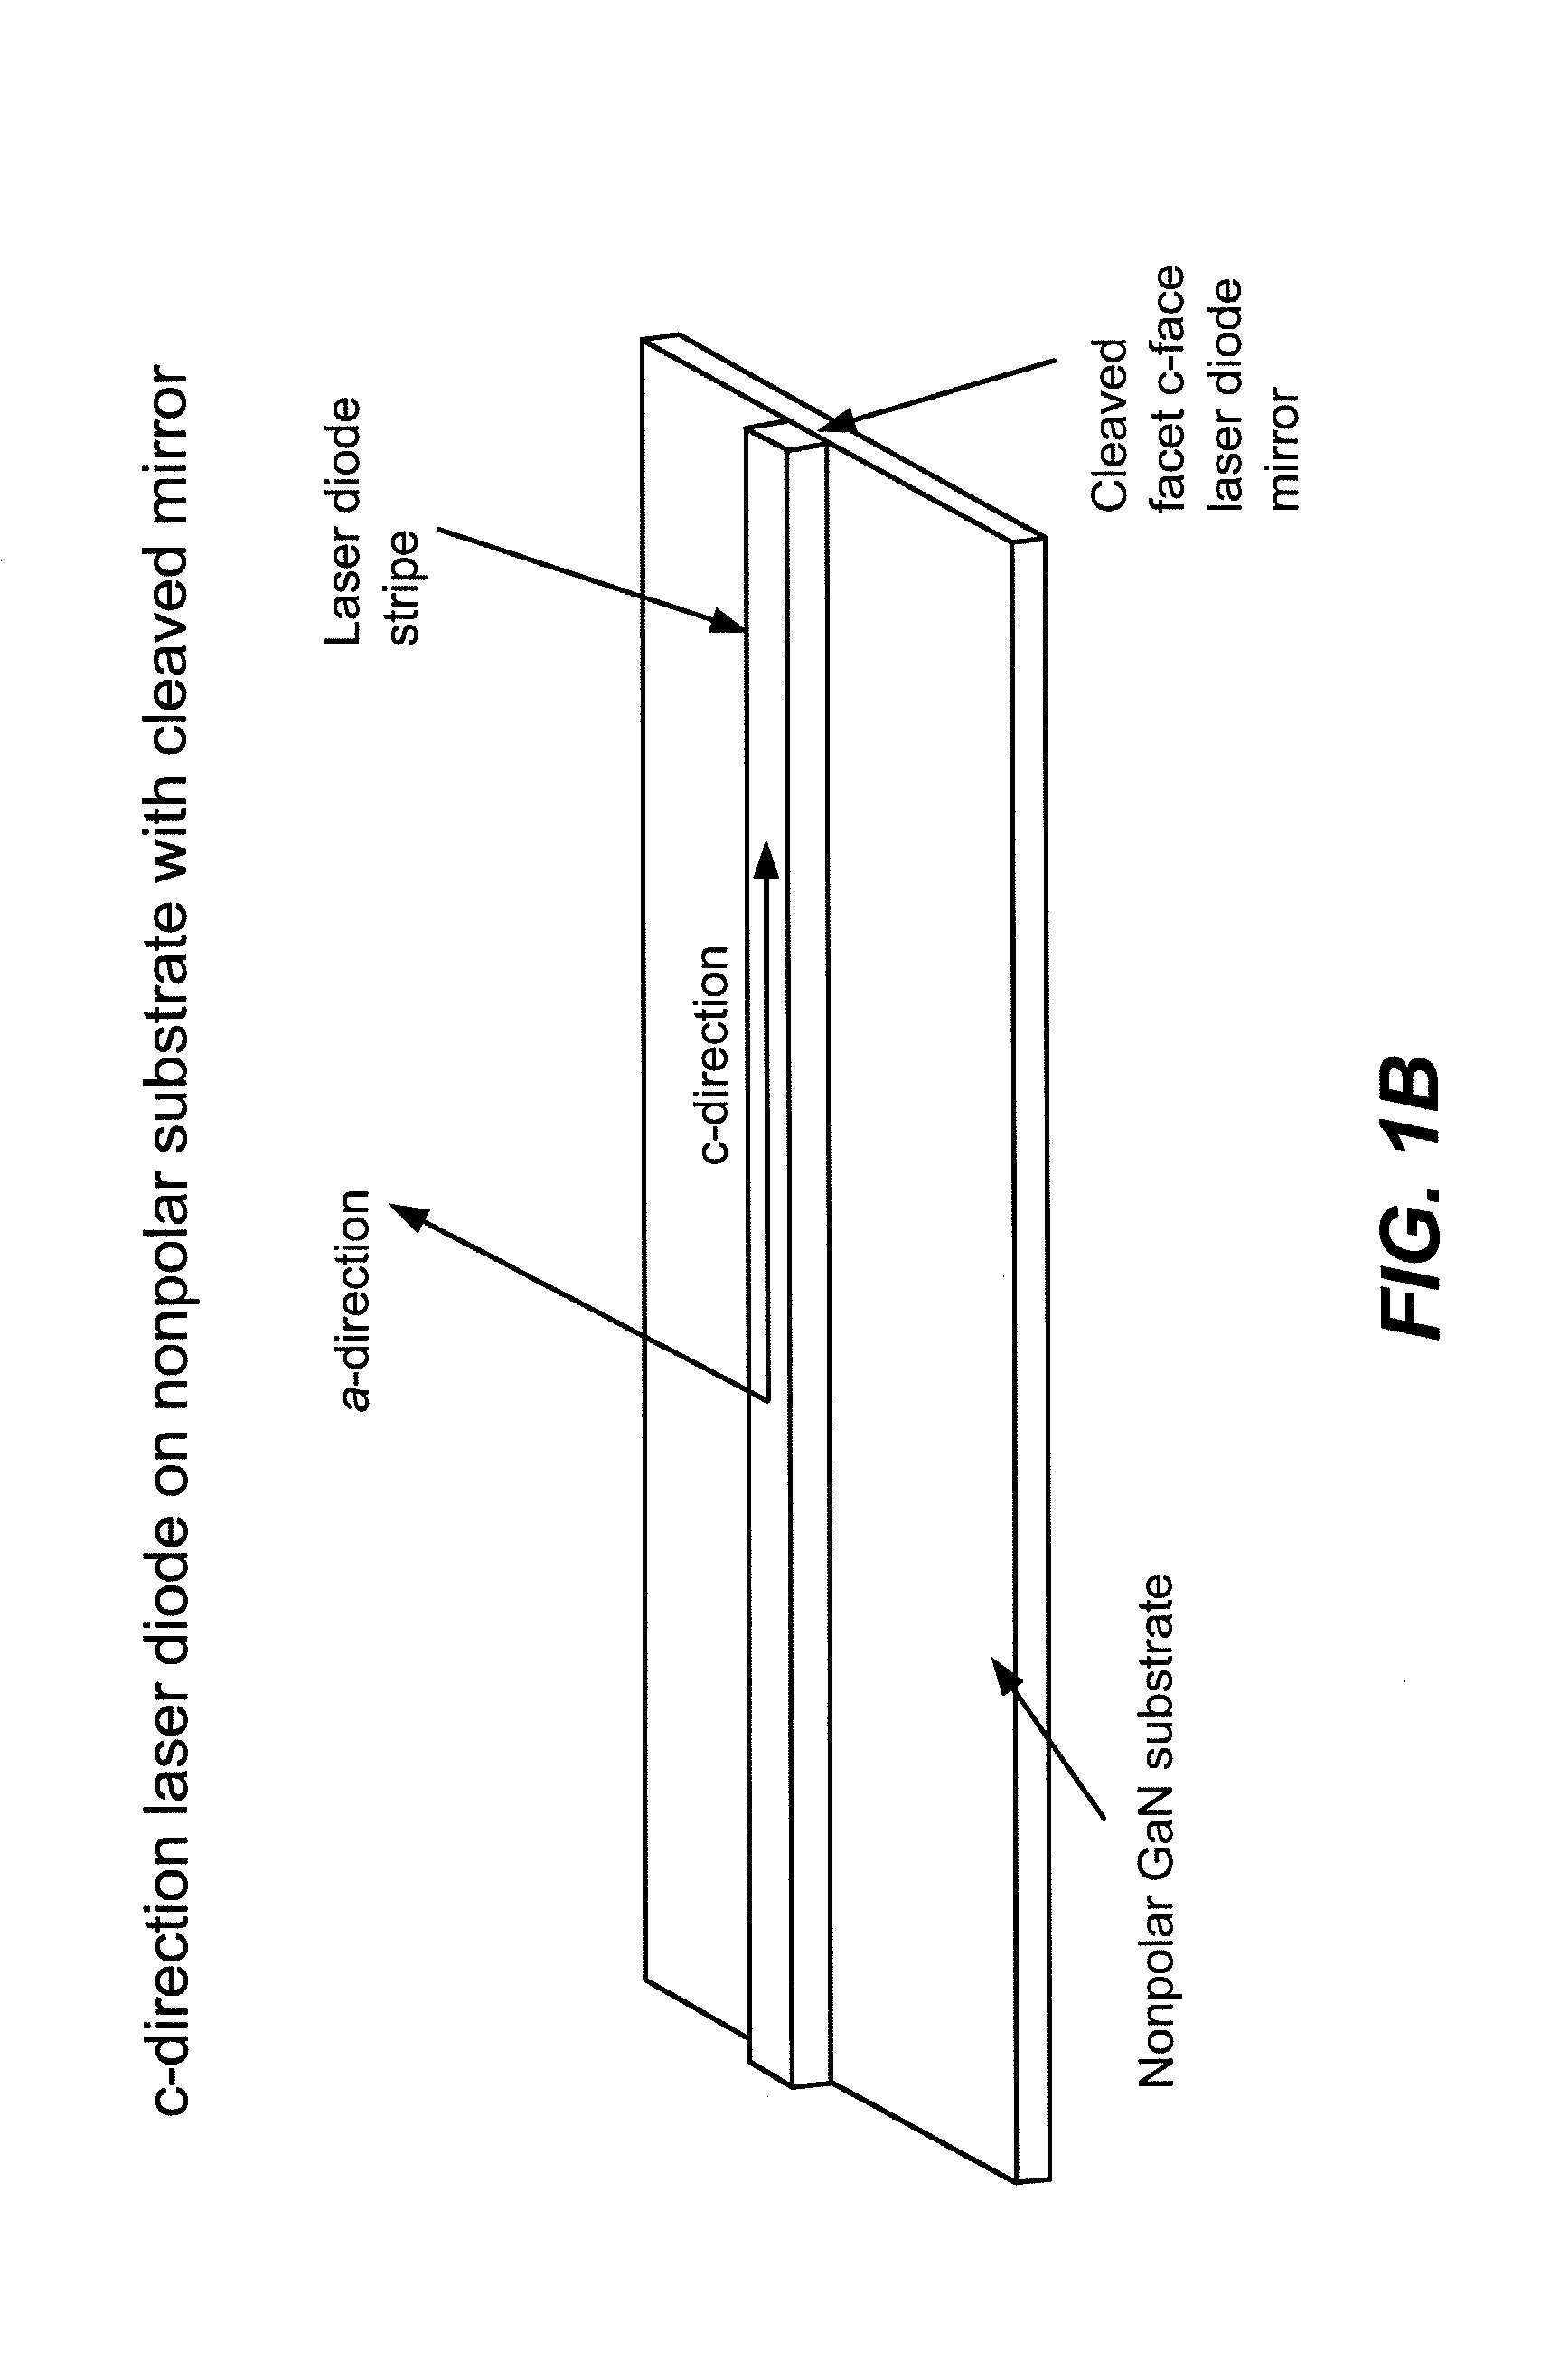 Optical device structure using GaN substrates and growth structure for laser applications